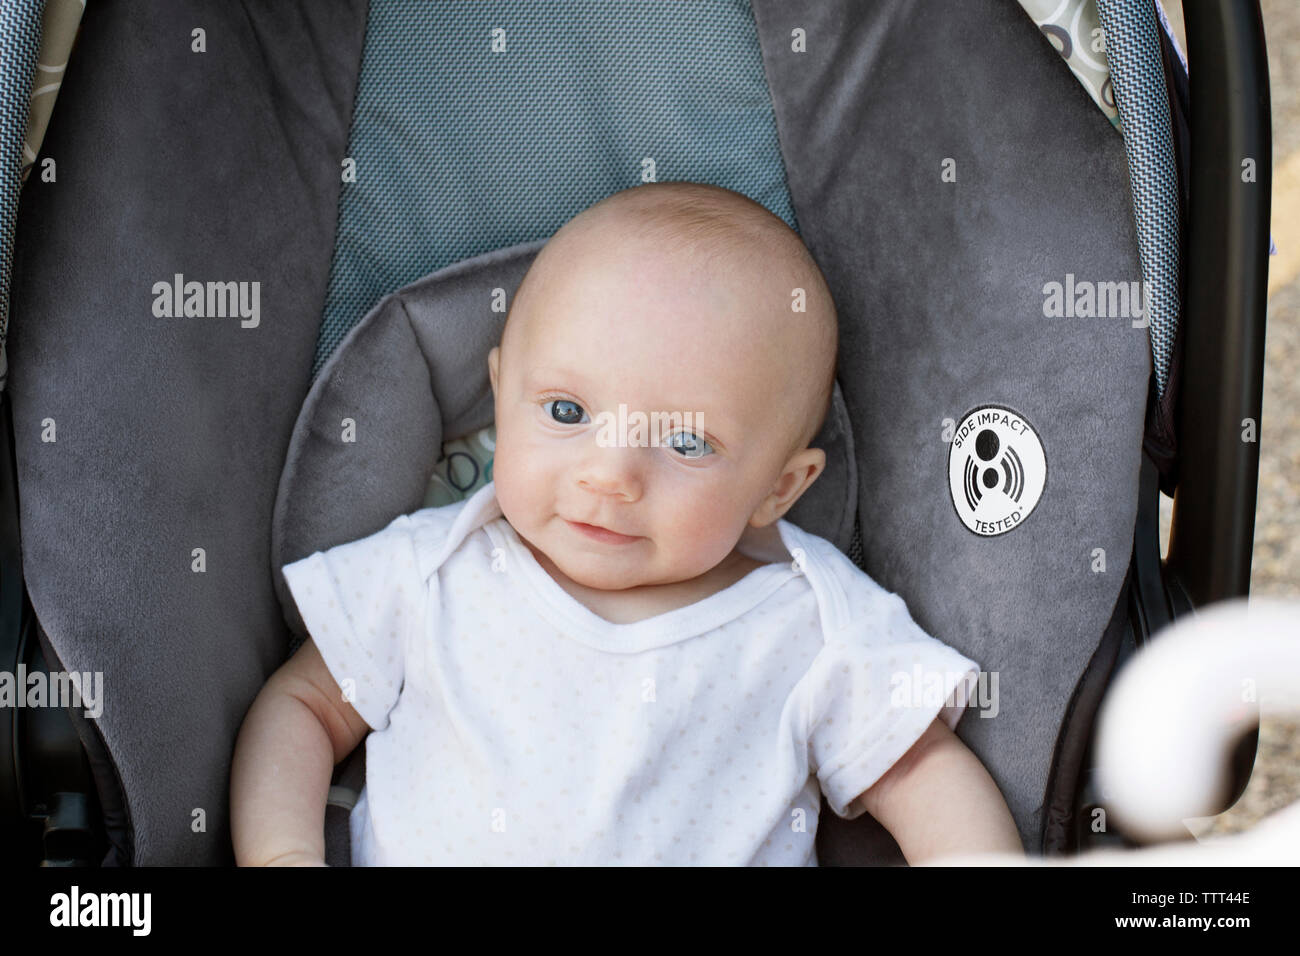 High angle portrait of baby resting in baby stroller Stock Photo